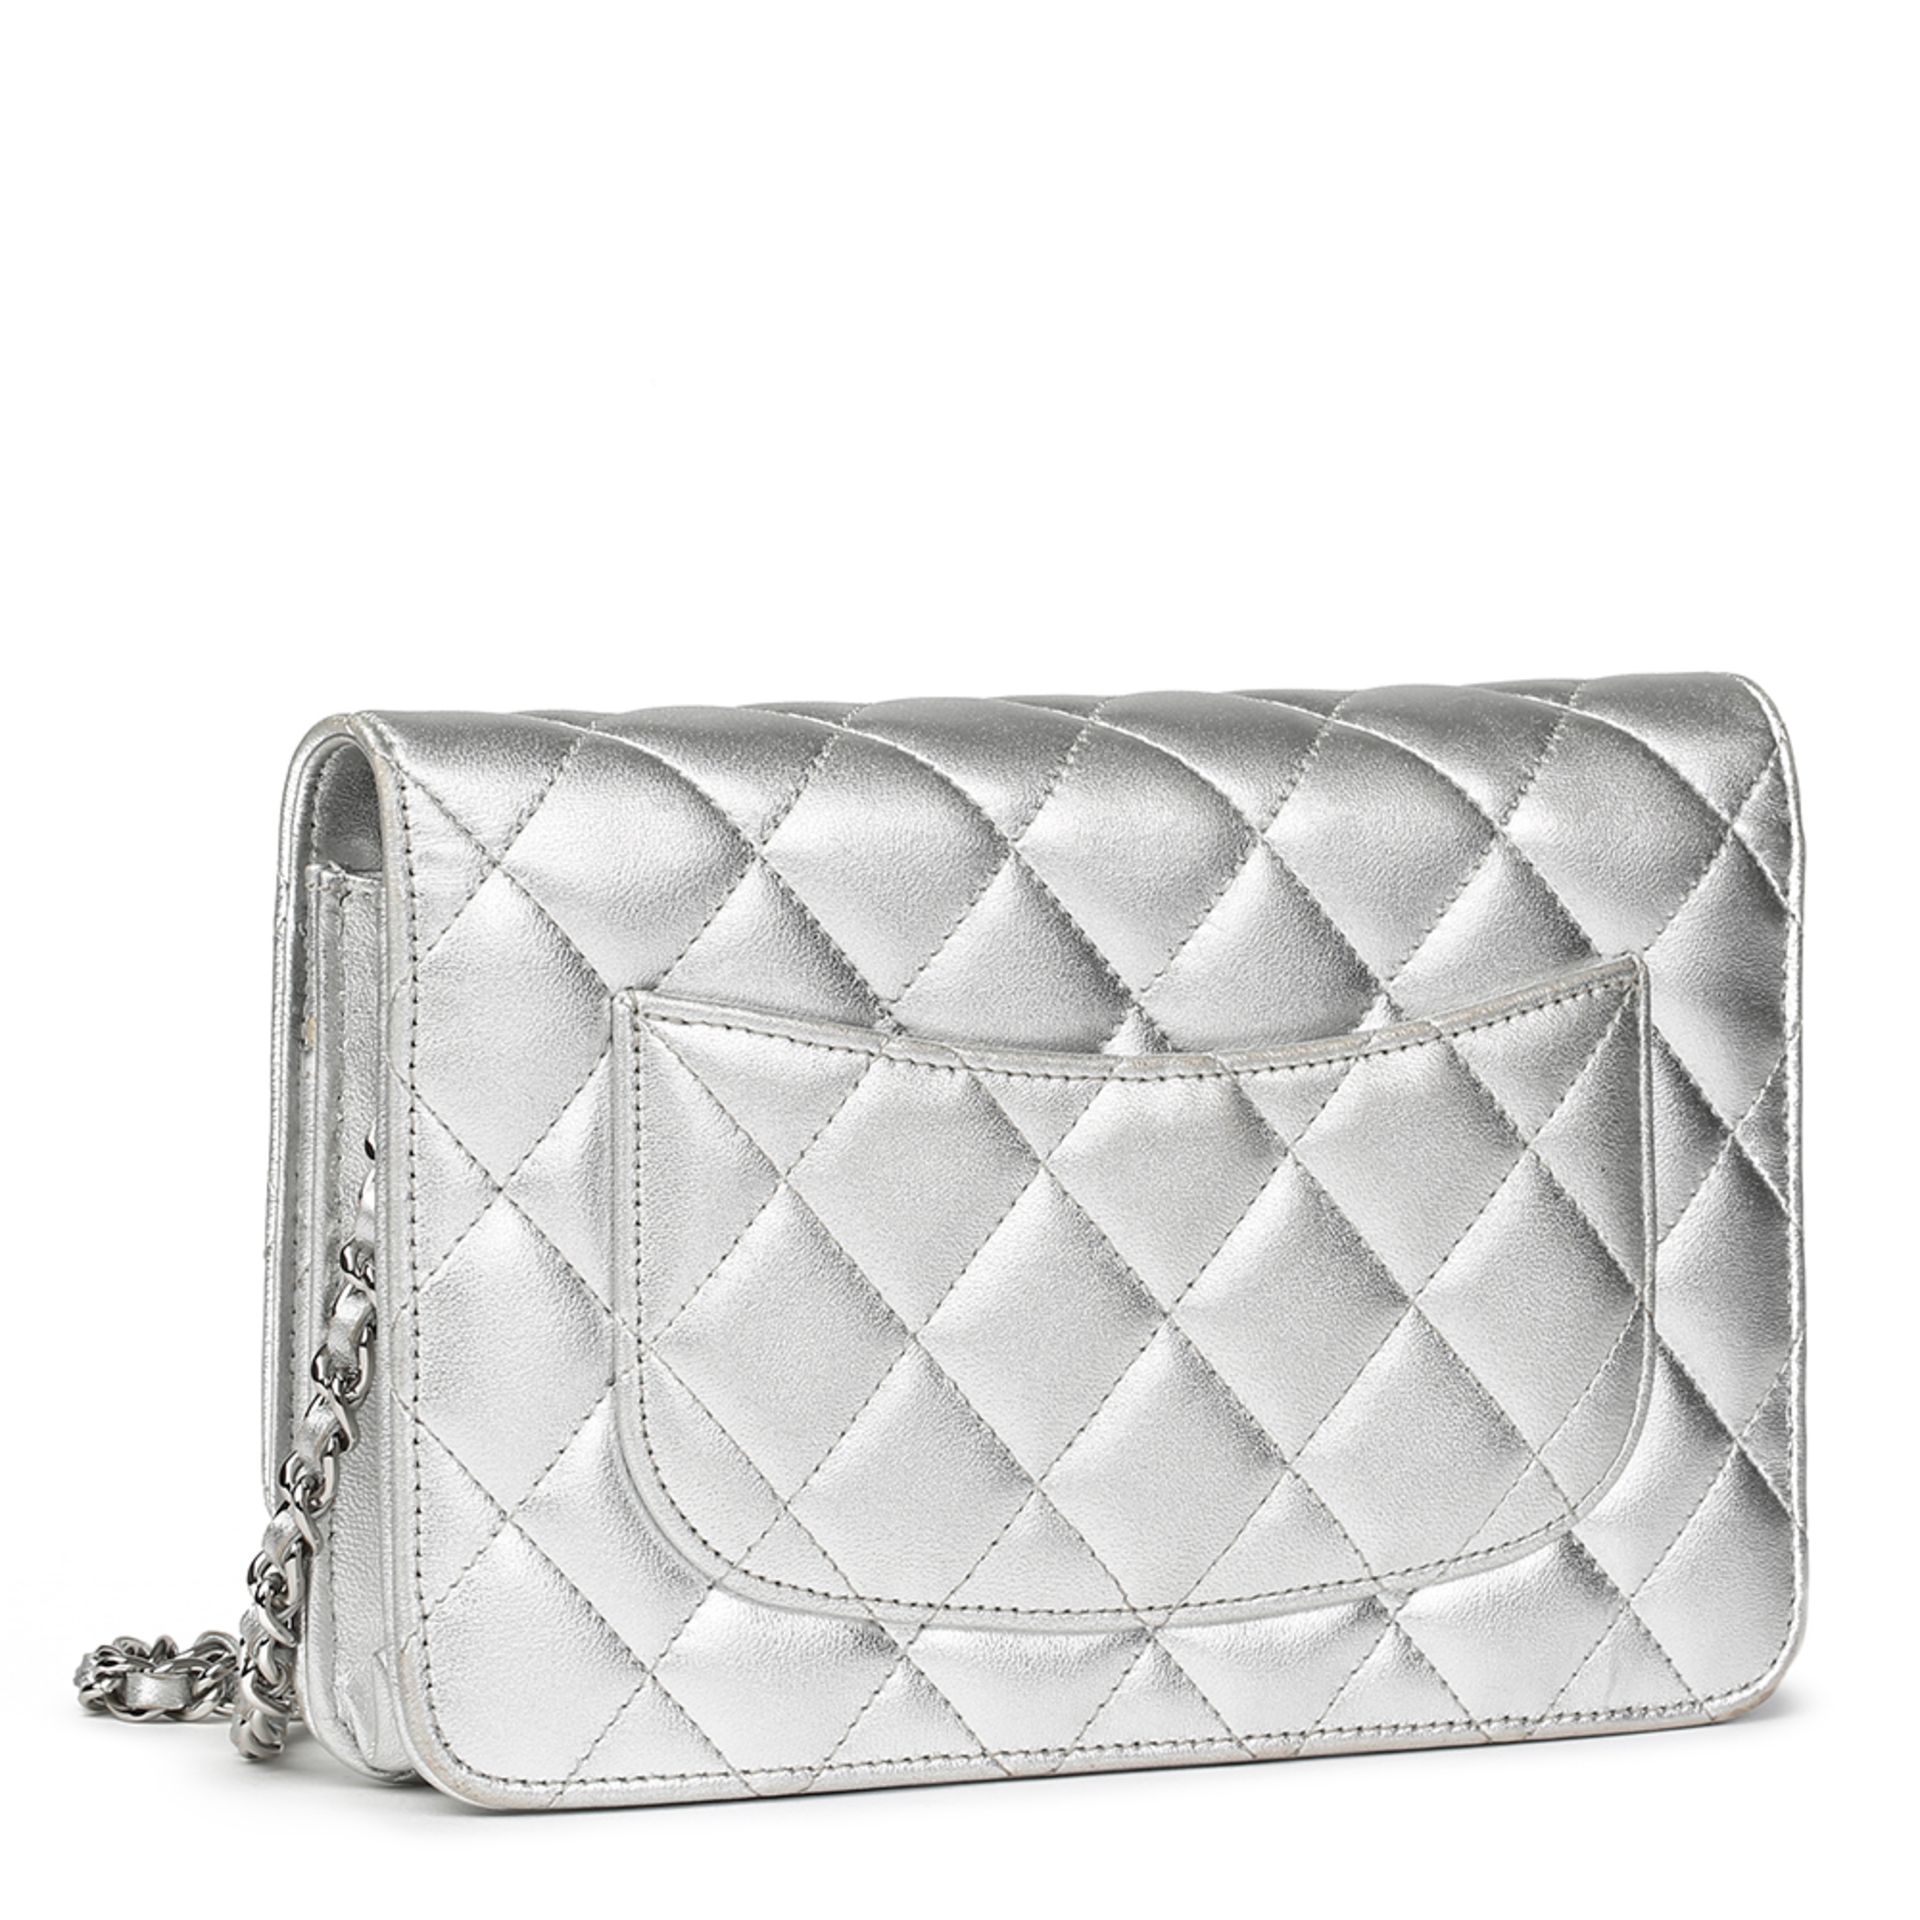 Silver Quilted Metallic Lambskin Wallet-On-Chain WOC - Image 3 of 11